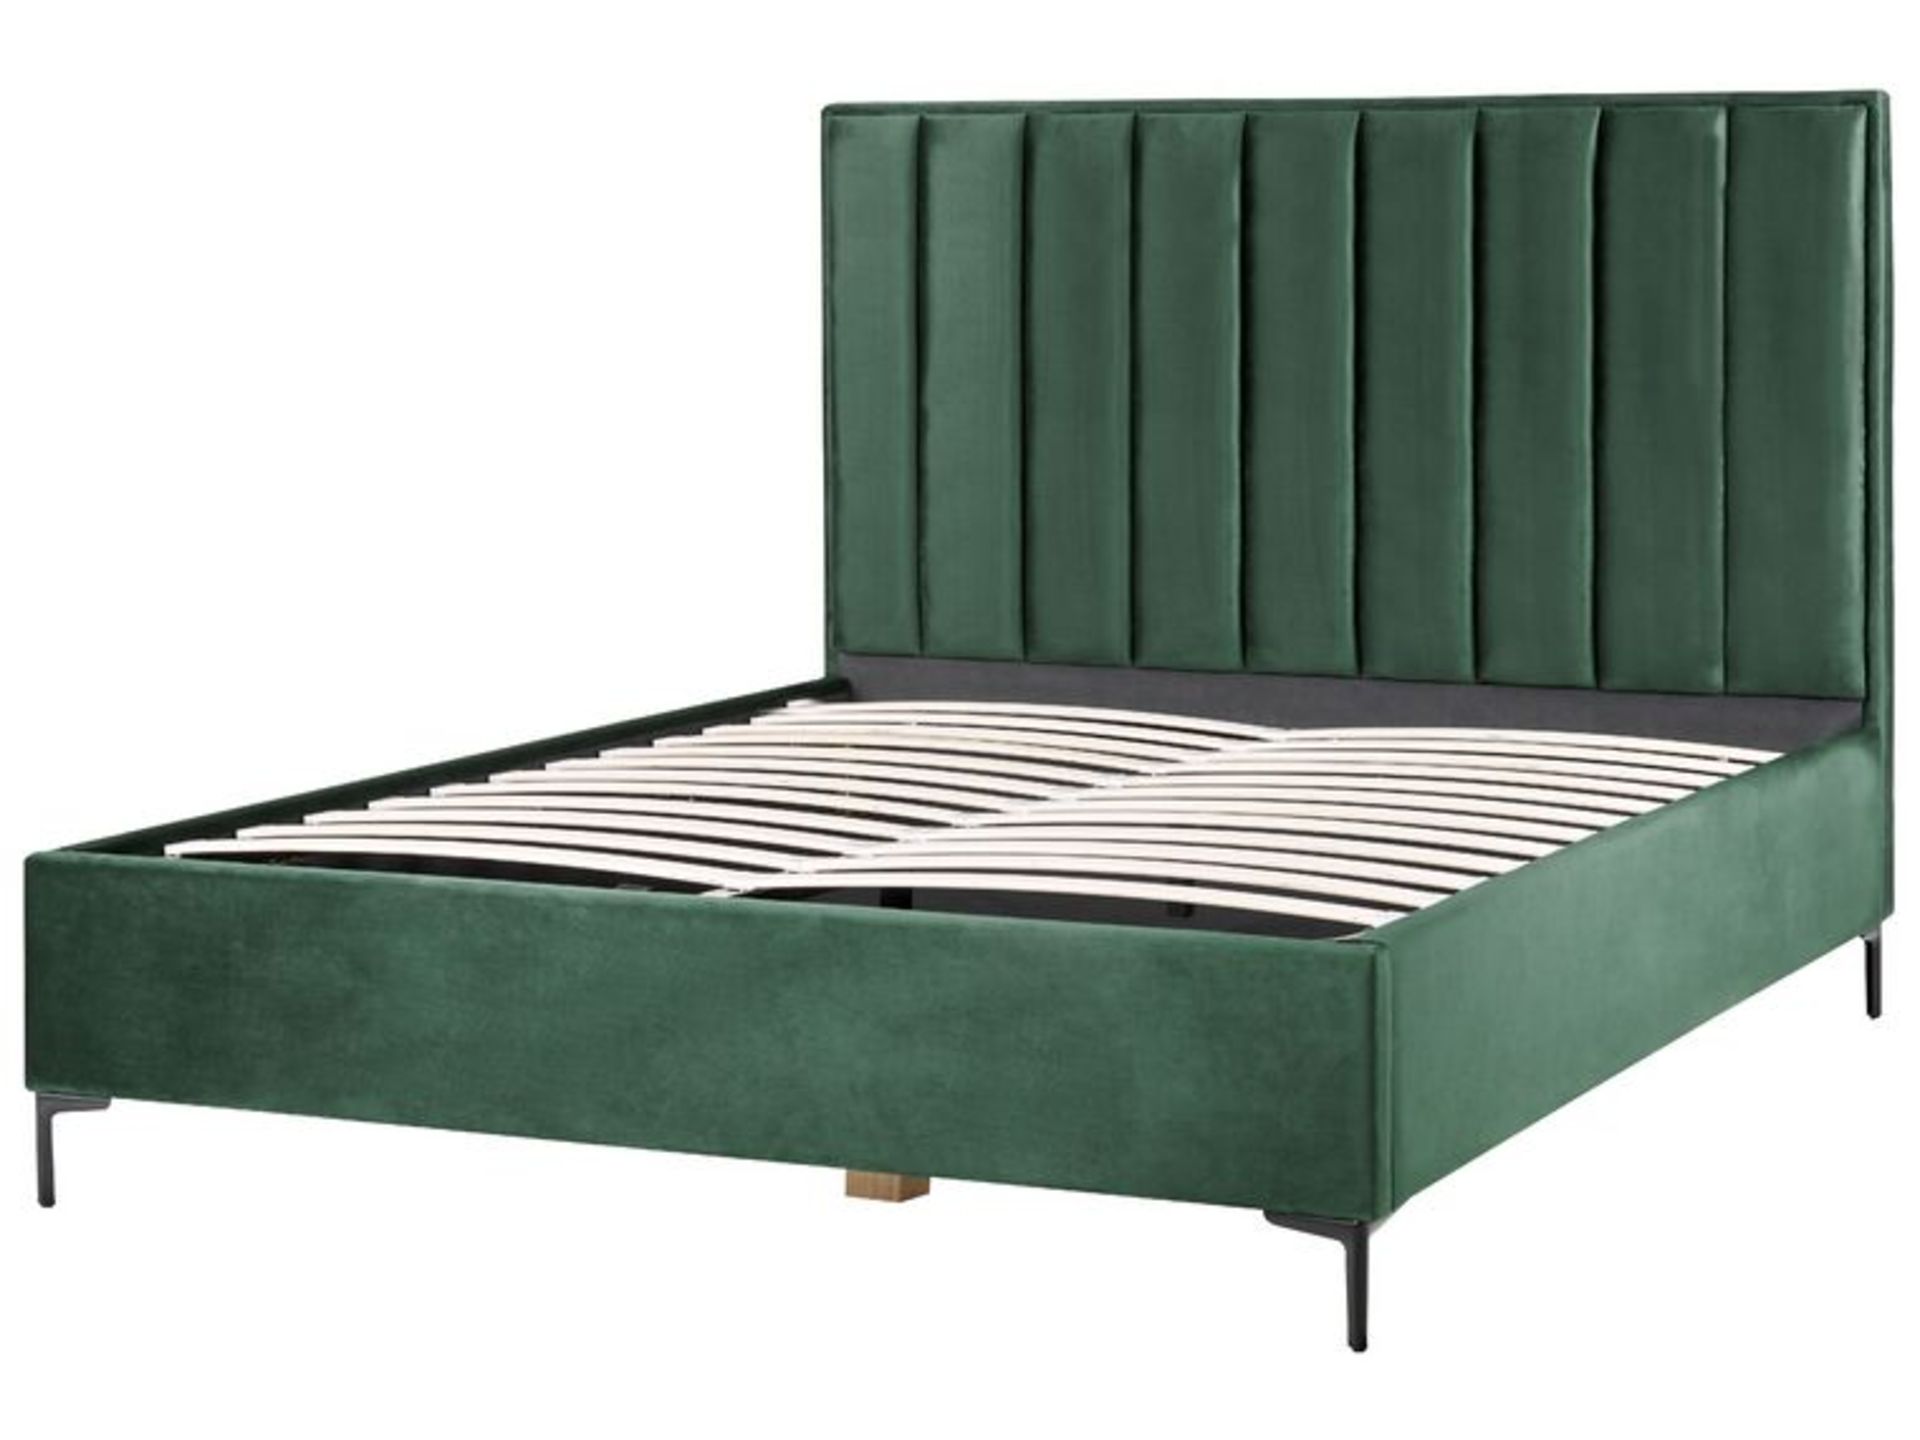 Sezanne Velvet EU Super King Size Ottoman Bed Dark Green. - R14. RRP £819.99. This beautiful bed - Image 2 of 3